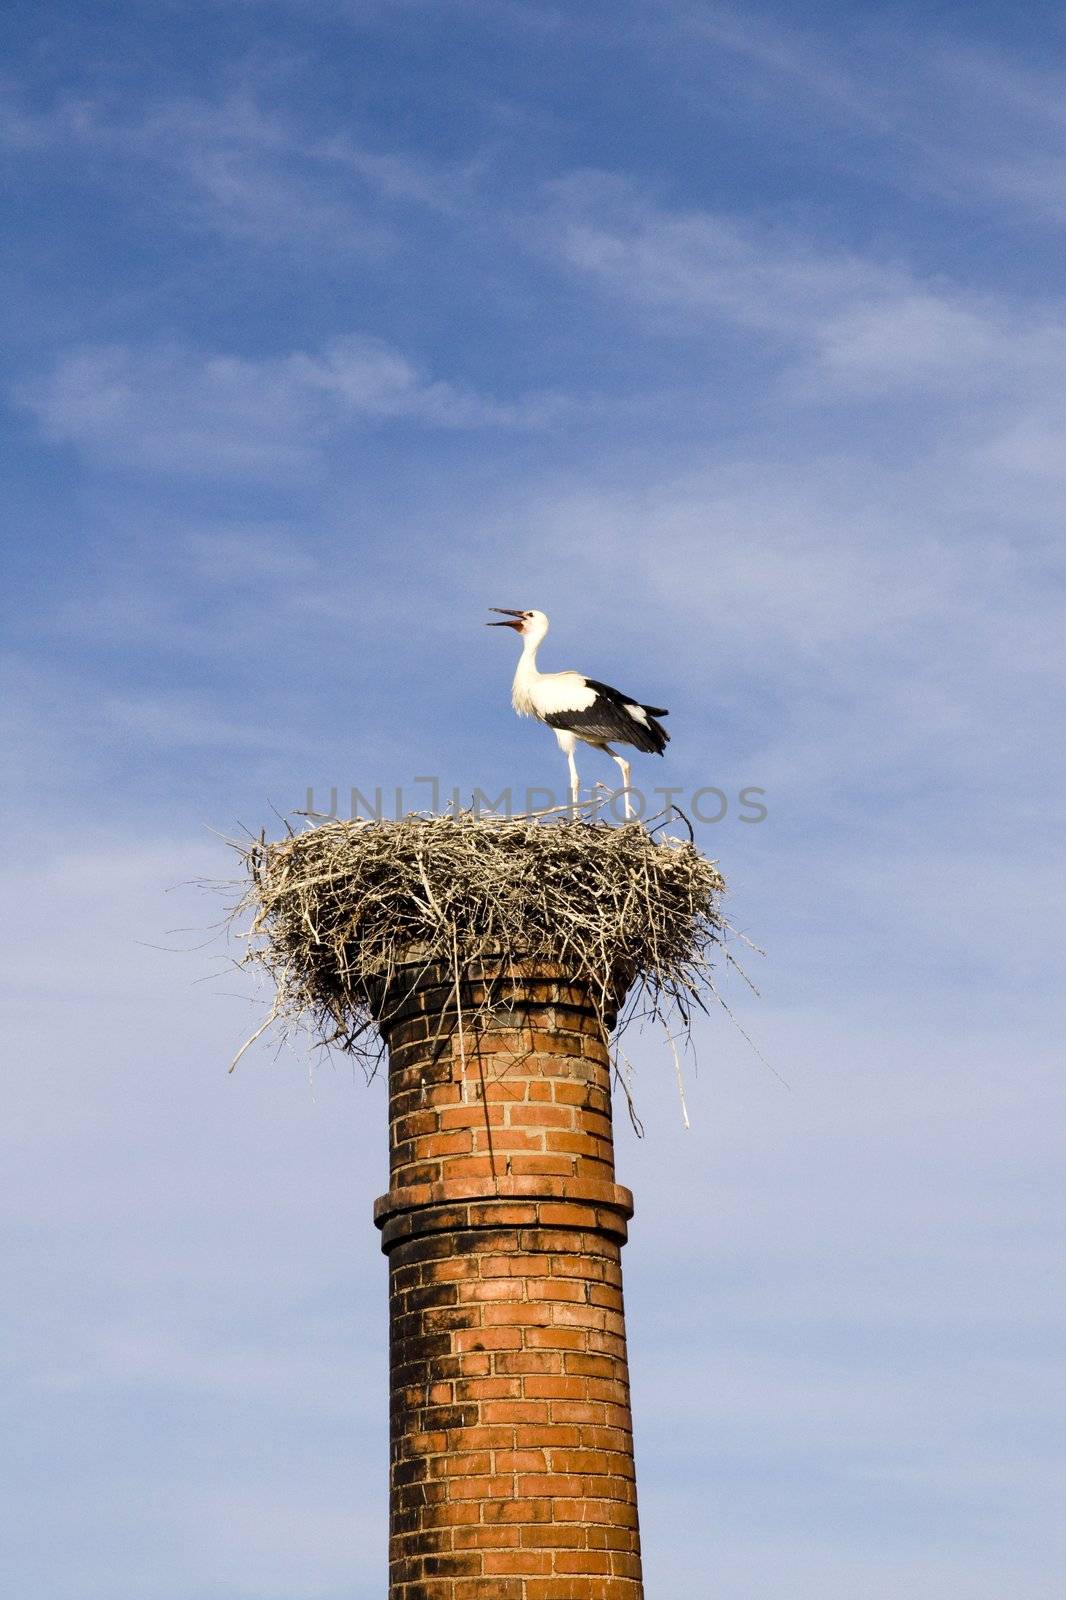 View of a nest with a stork on top of an abandoned factory chimney.